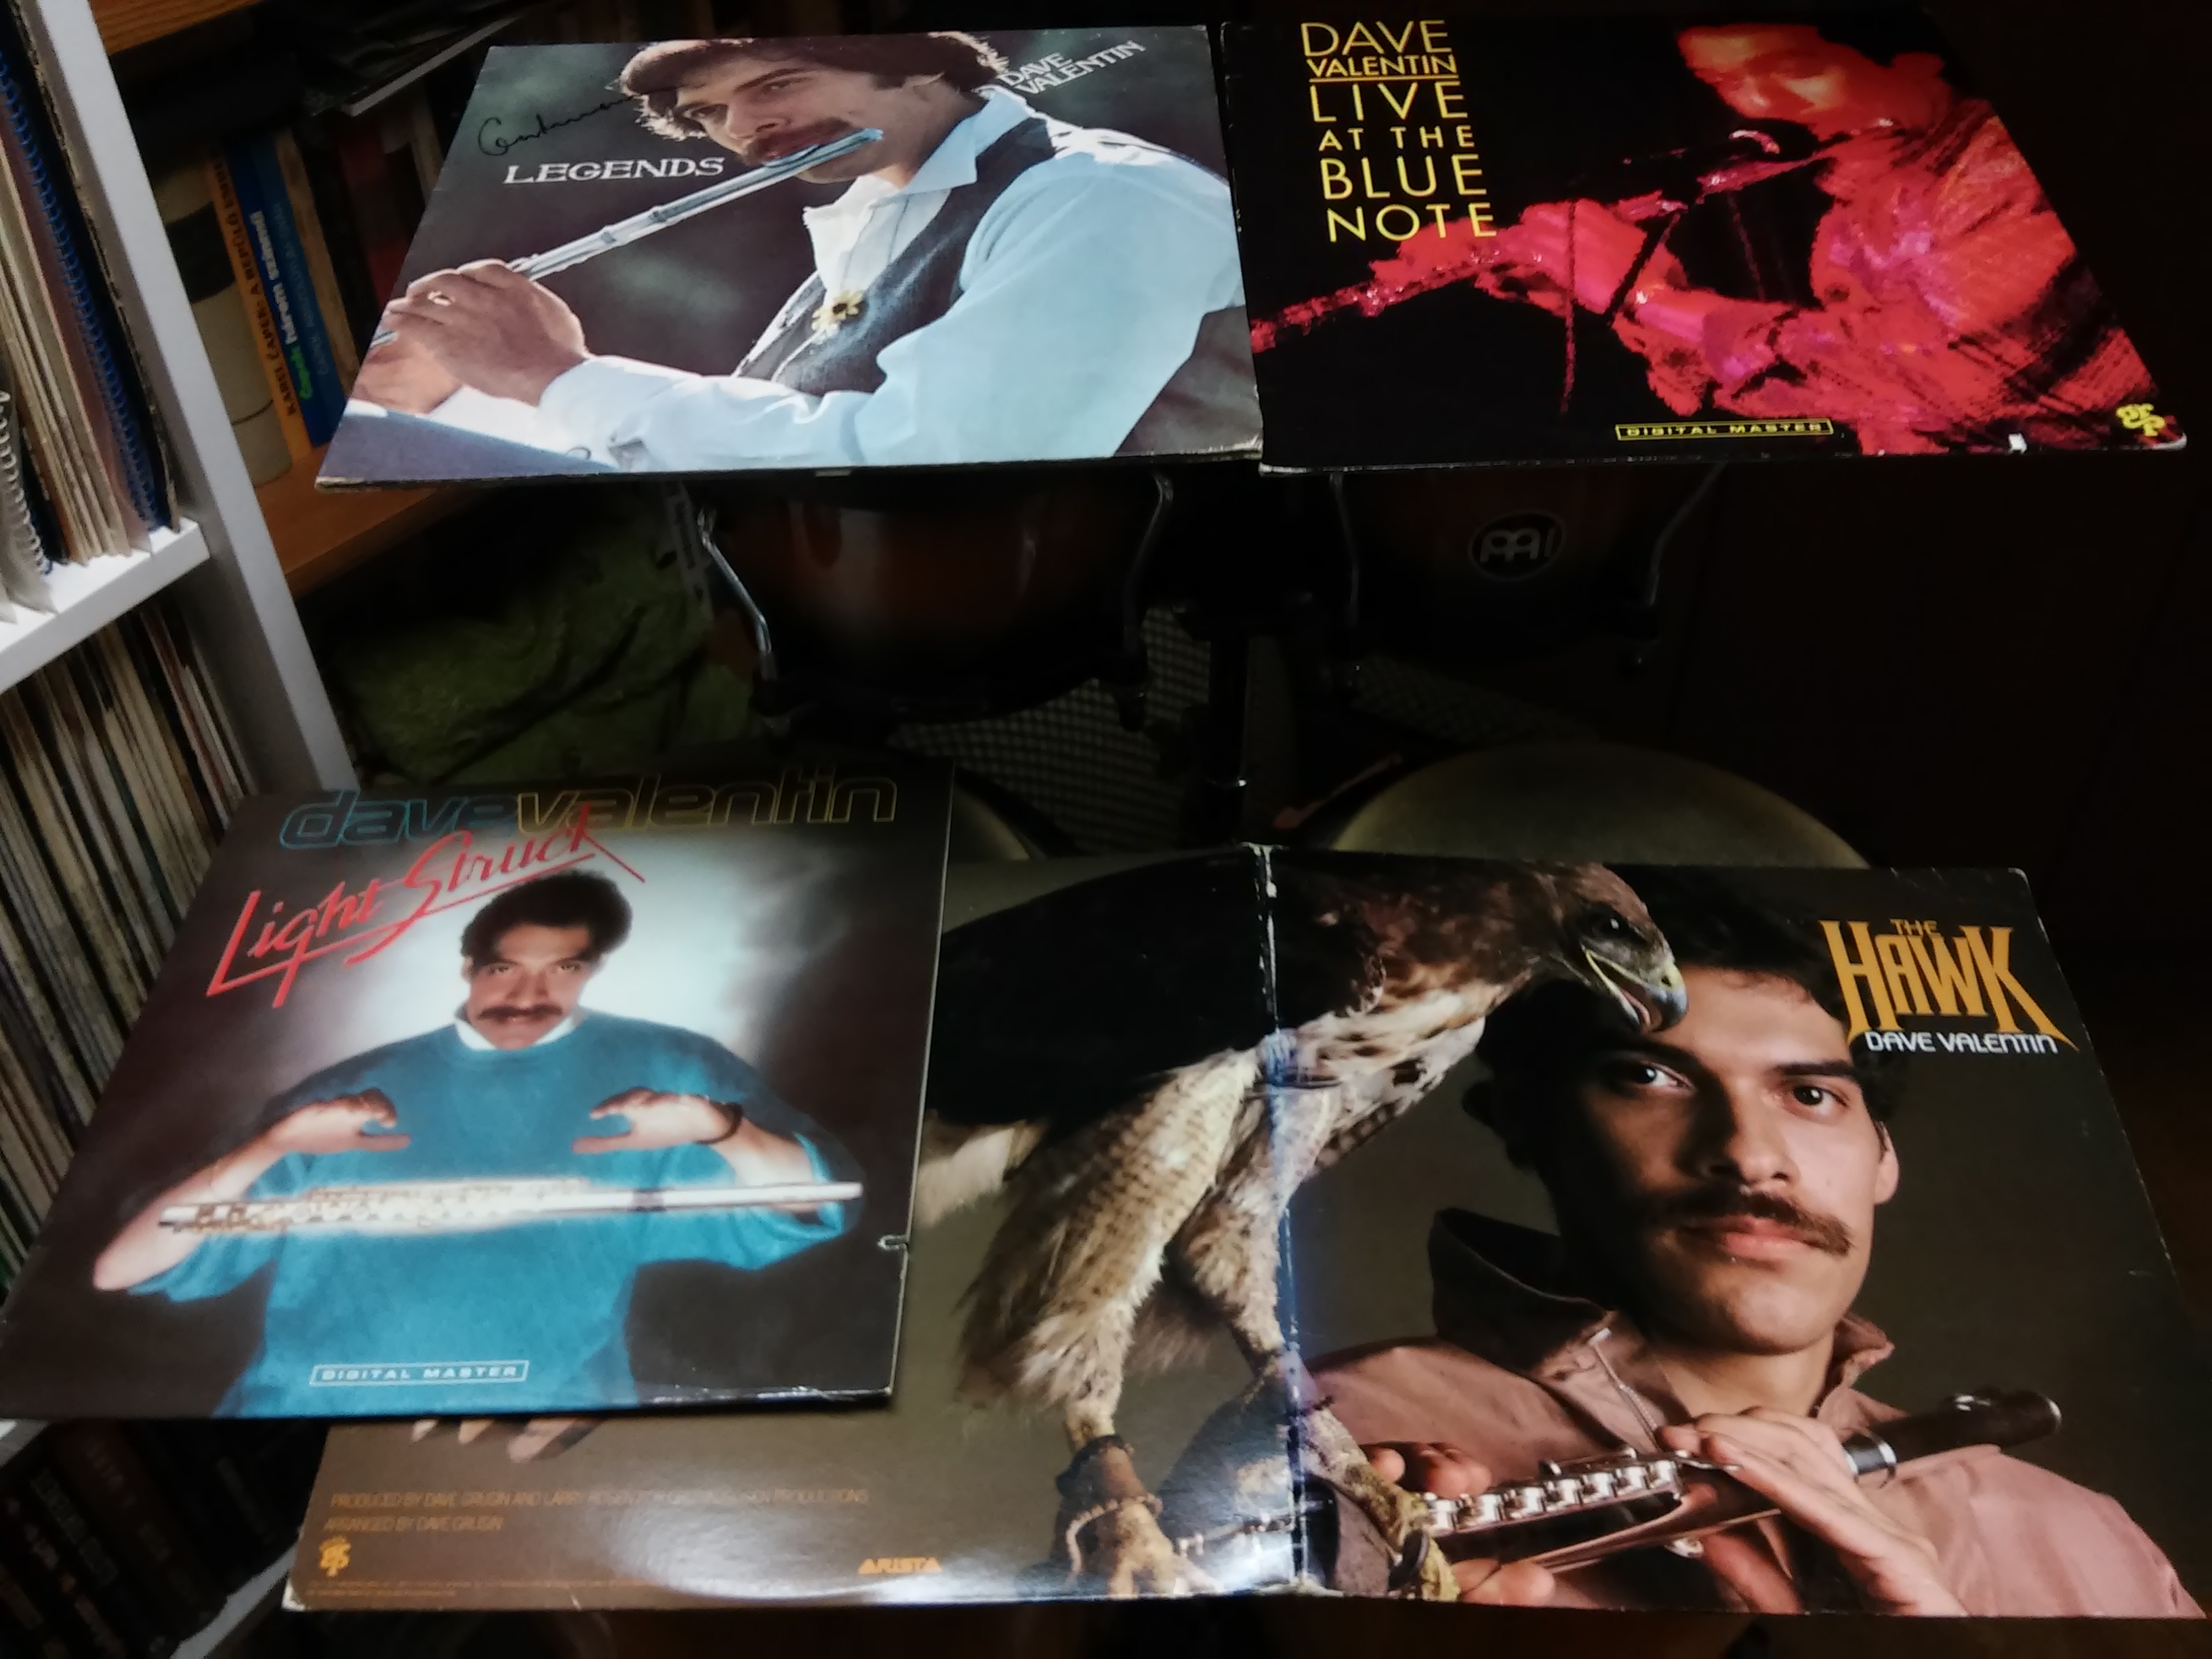 Rest in peace, Dave Valentin! 